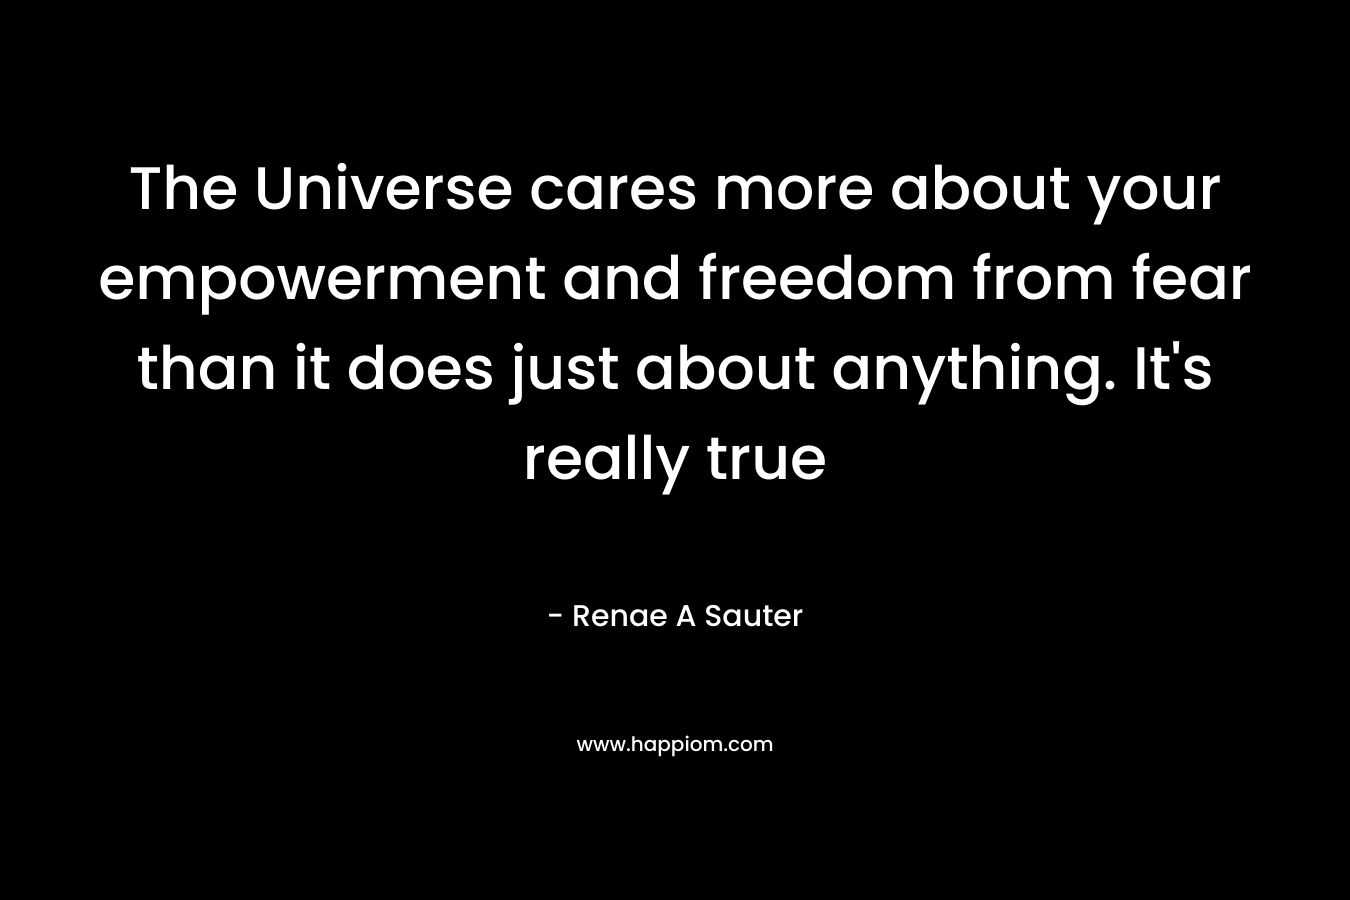 The Universe cares more about your empowerment and freedom from fear than it does just about anything. It's really true